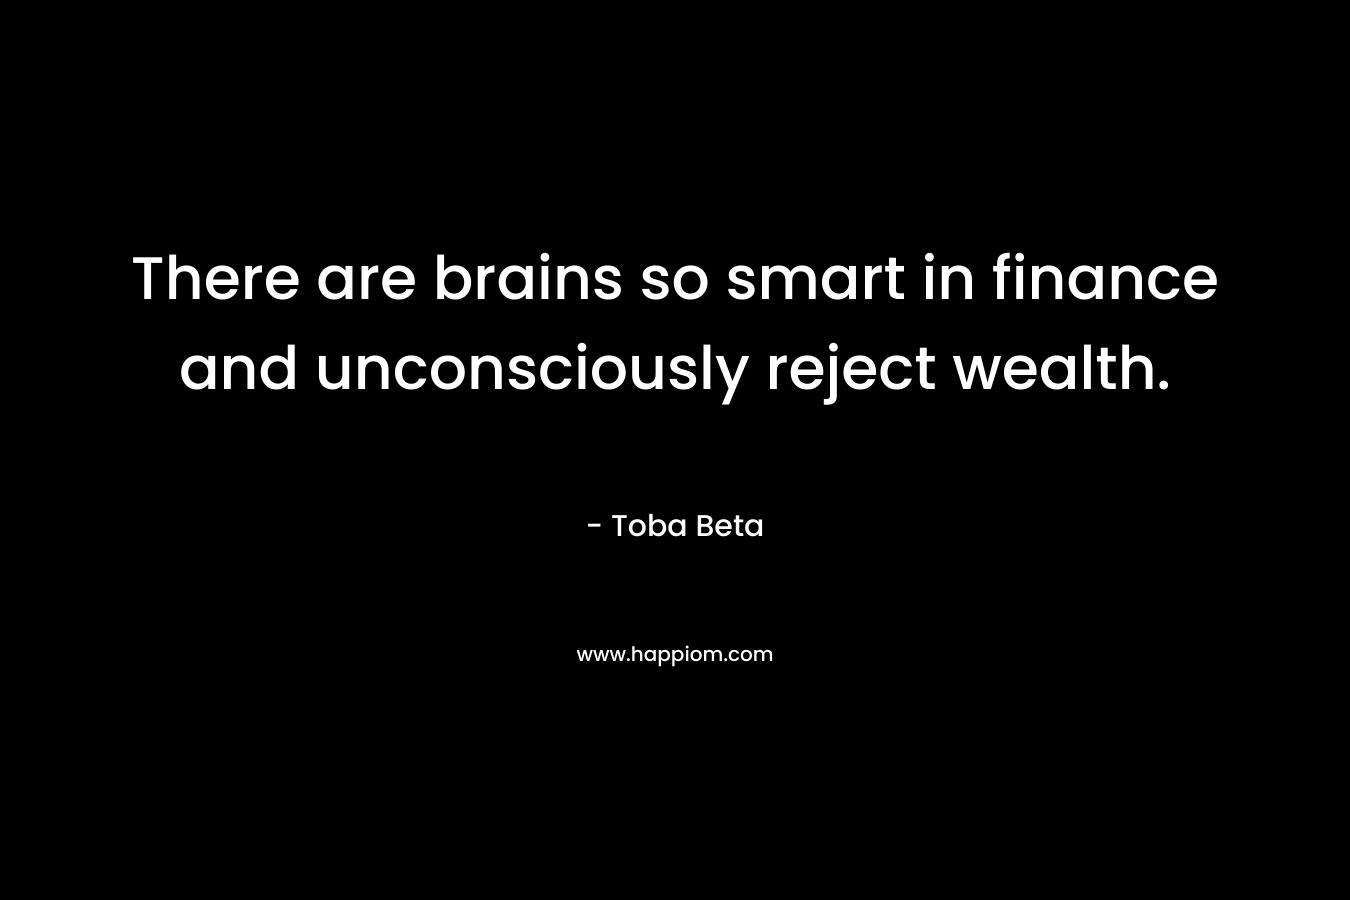 There are brains so smart in finance and unconsciously reject wealth.